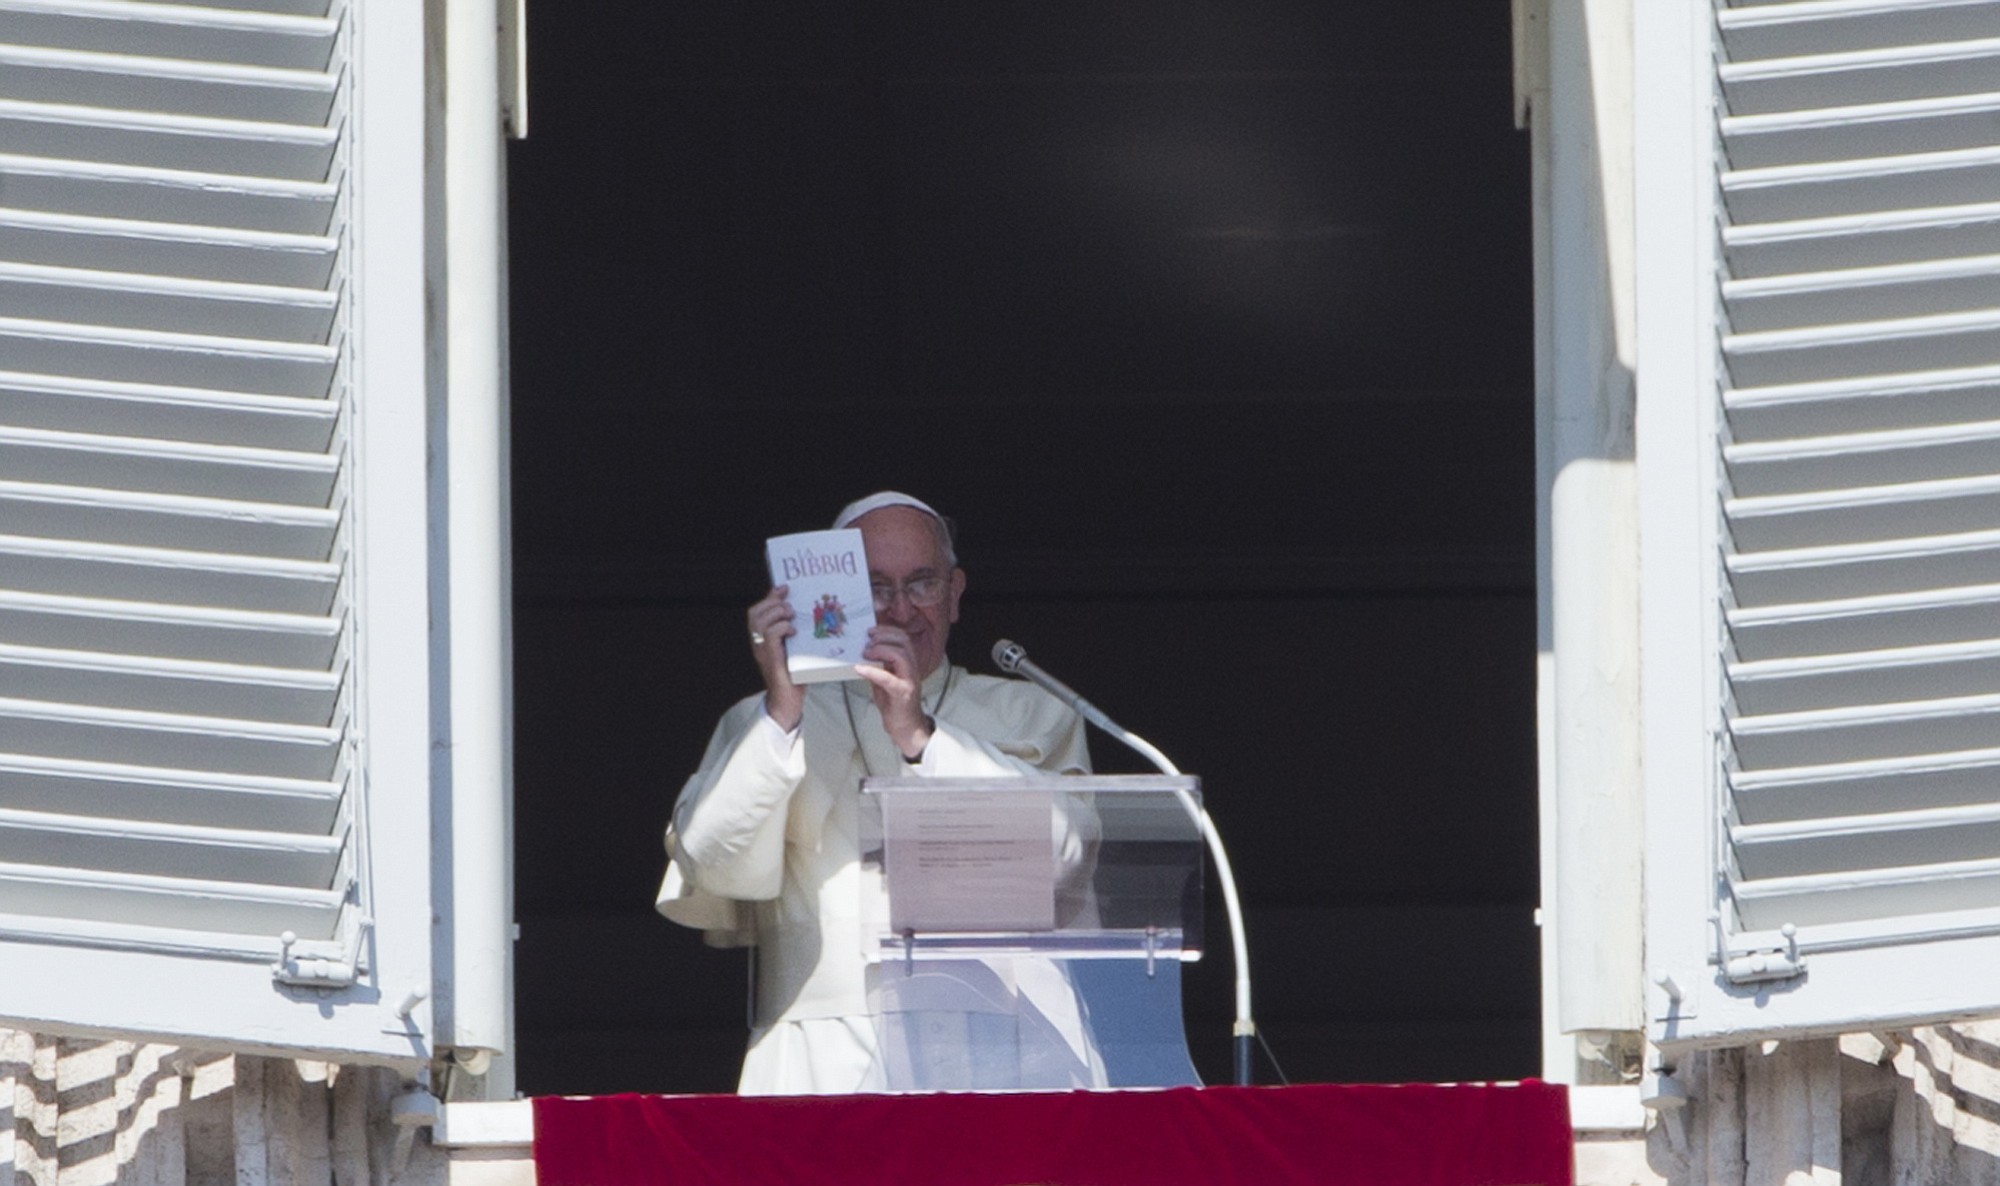 Pope Francis holds up a copy of the Gospel on Sunday during the Angelus prayer in St. Peter's Square at the Vatican.